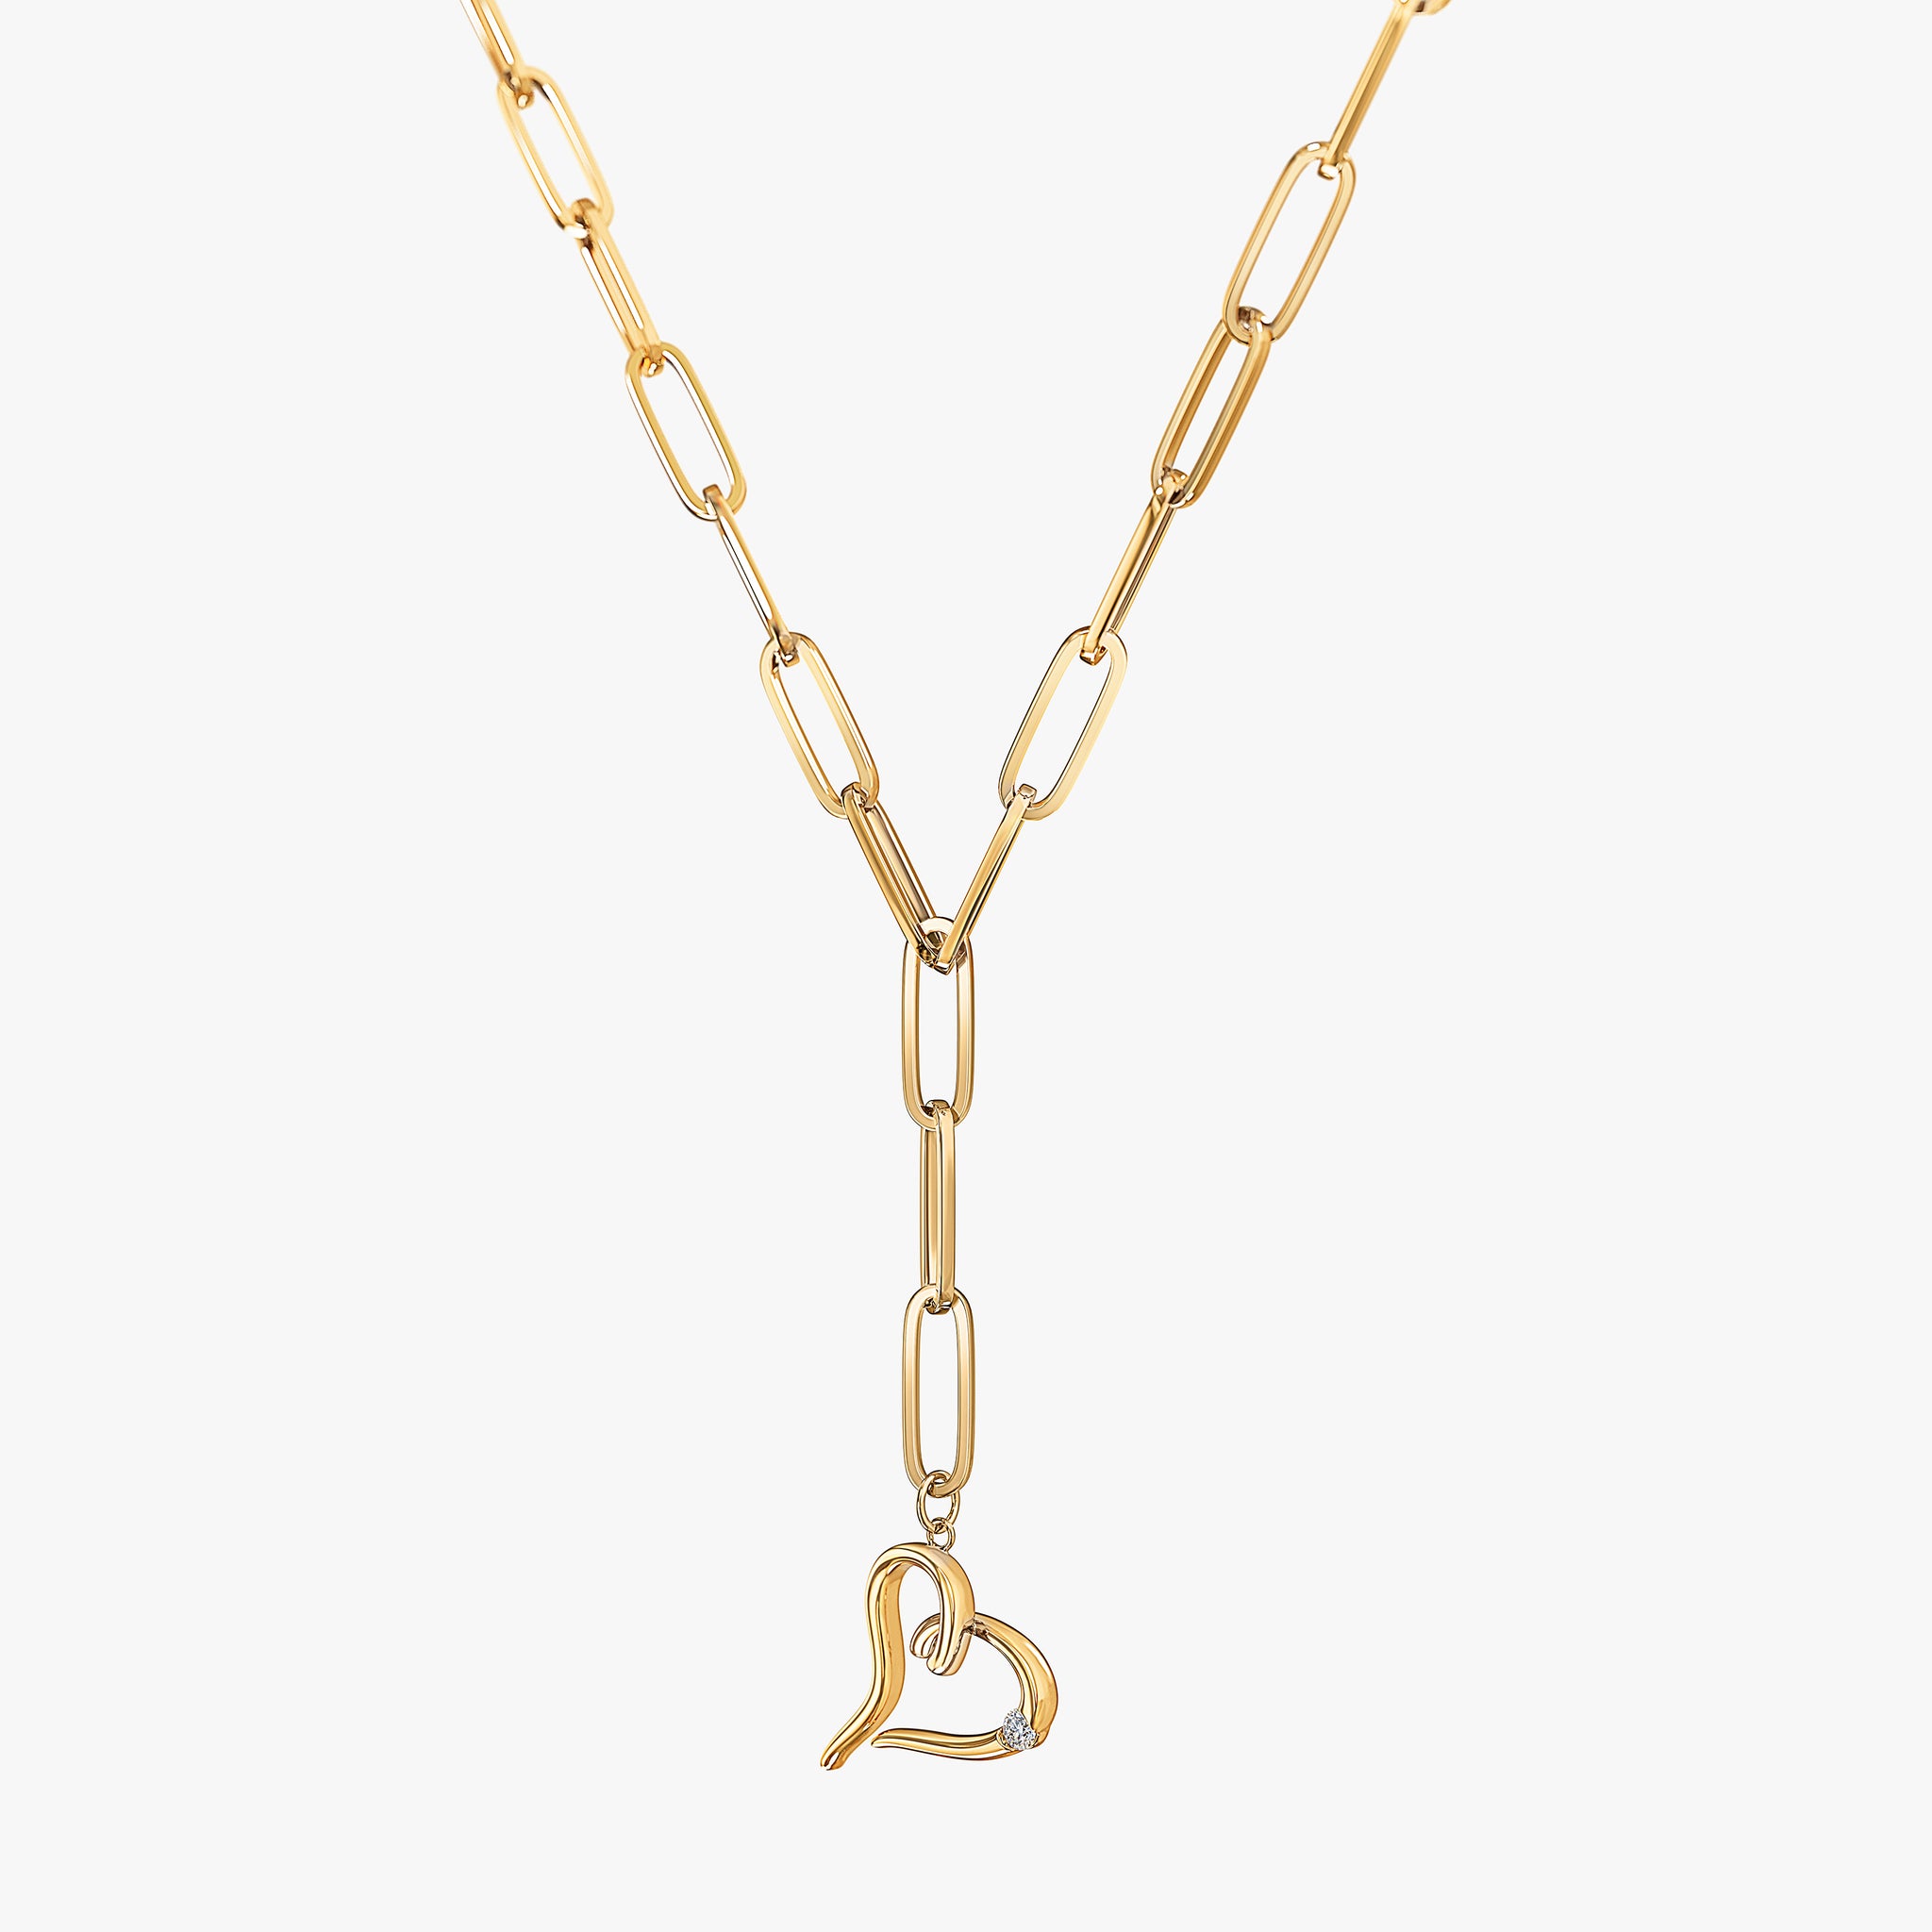 J'EVAR 14KT Yellow Gold Paperclip Lariat Heart ALTR Lab Grown Diamond Necklace Perspective View